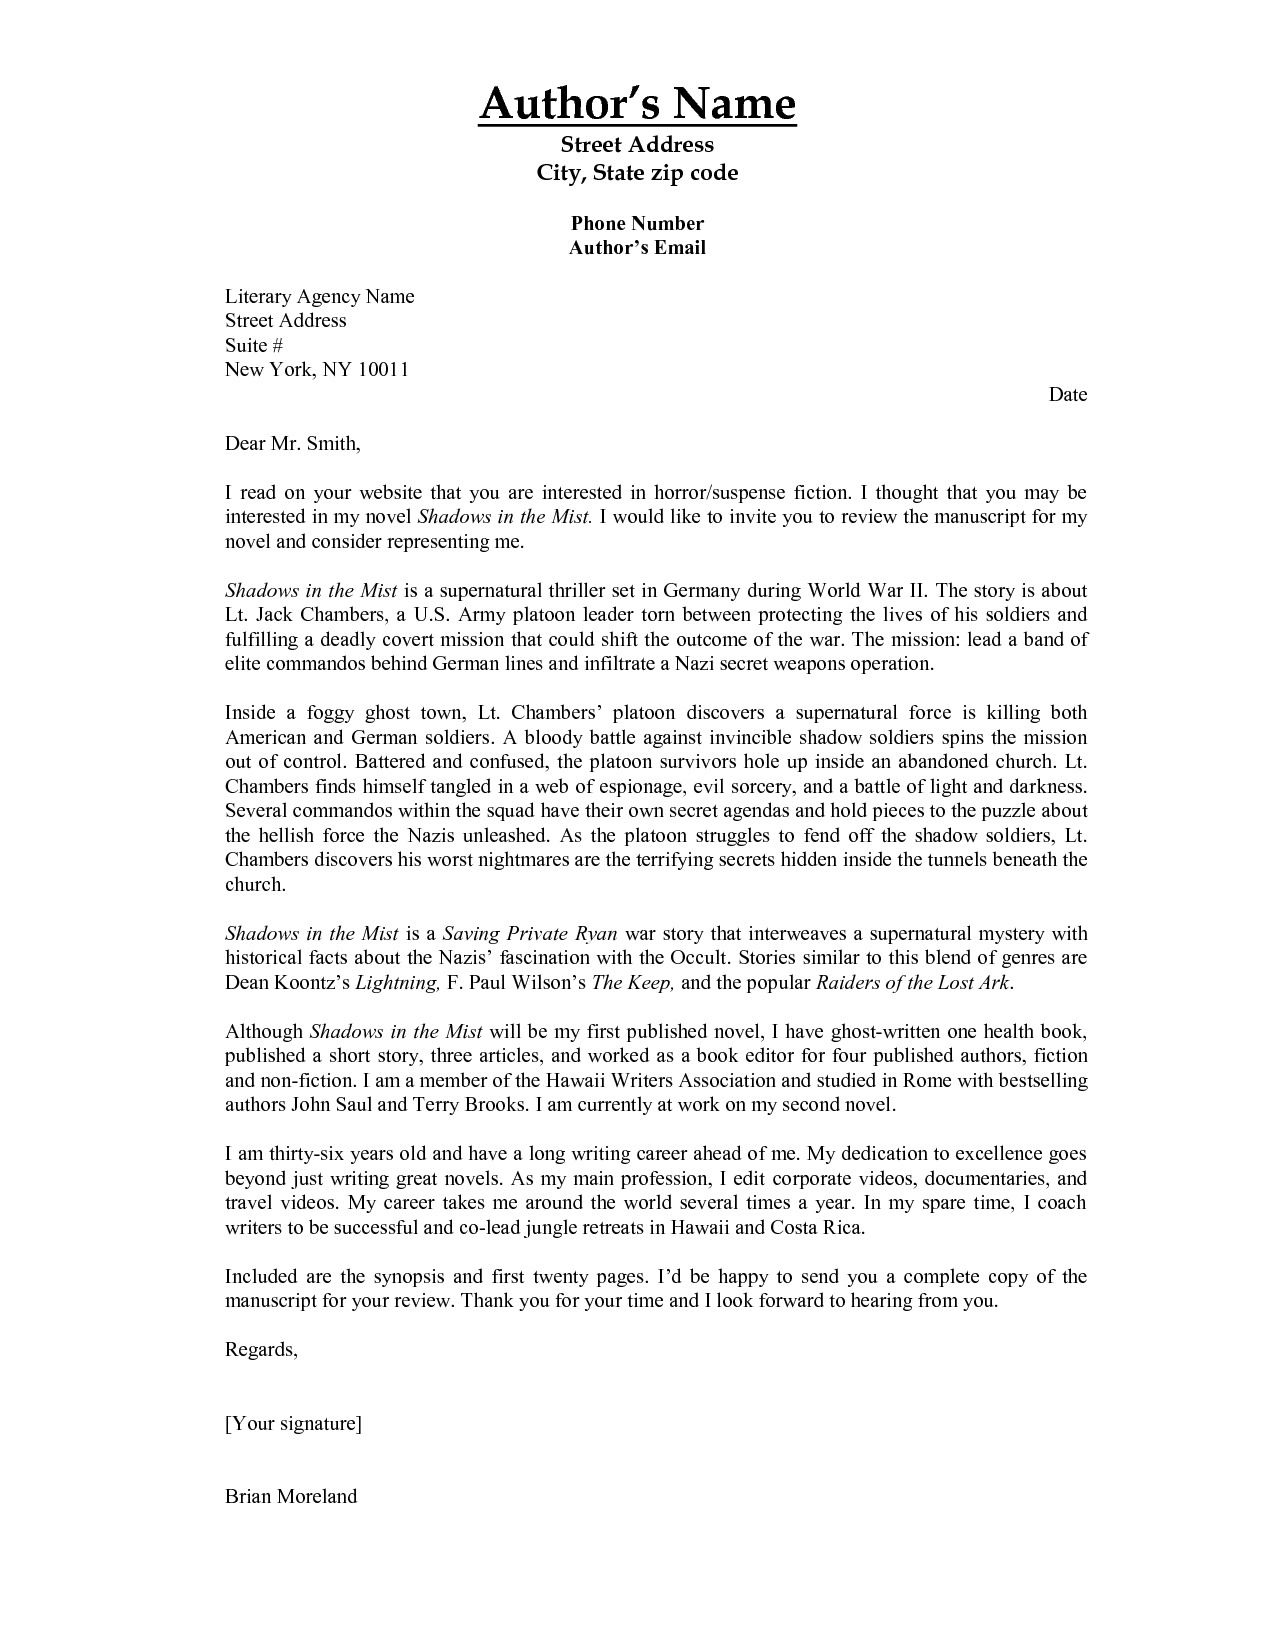 Query Letter Template Recommendation Letter Template in dimensions 1275 X 1650